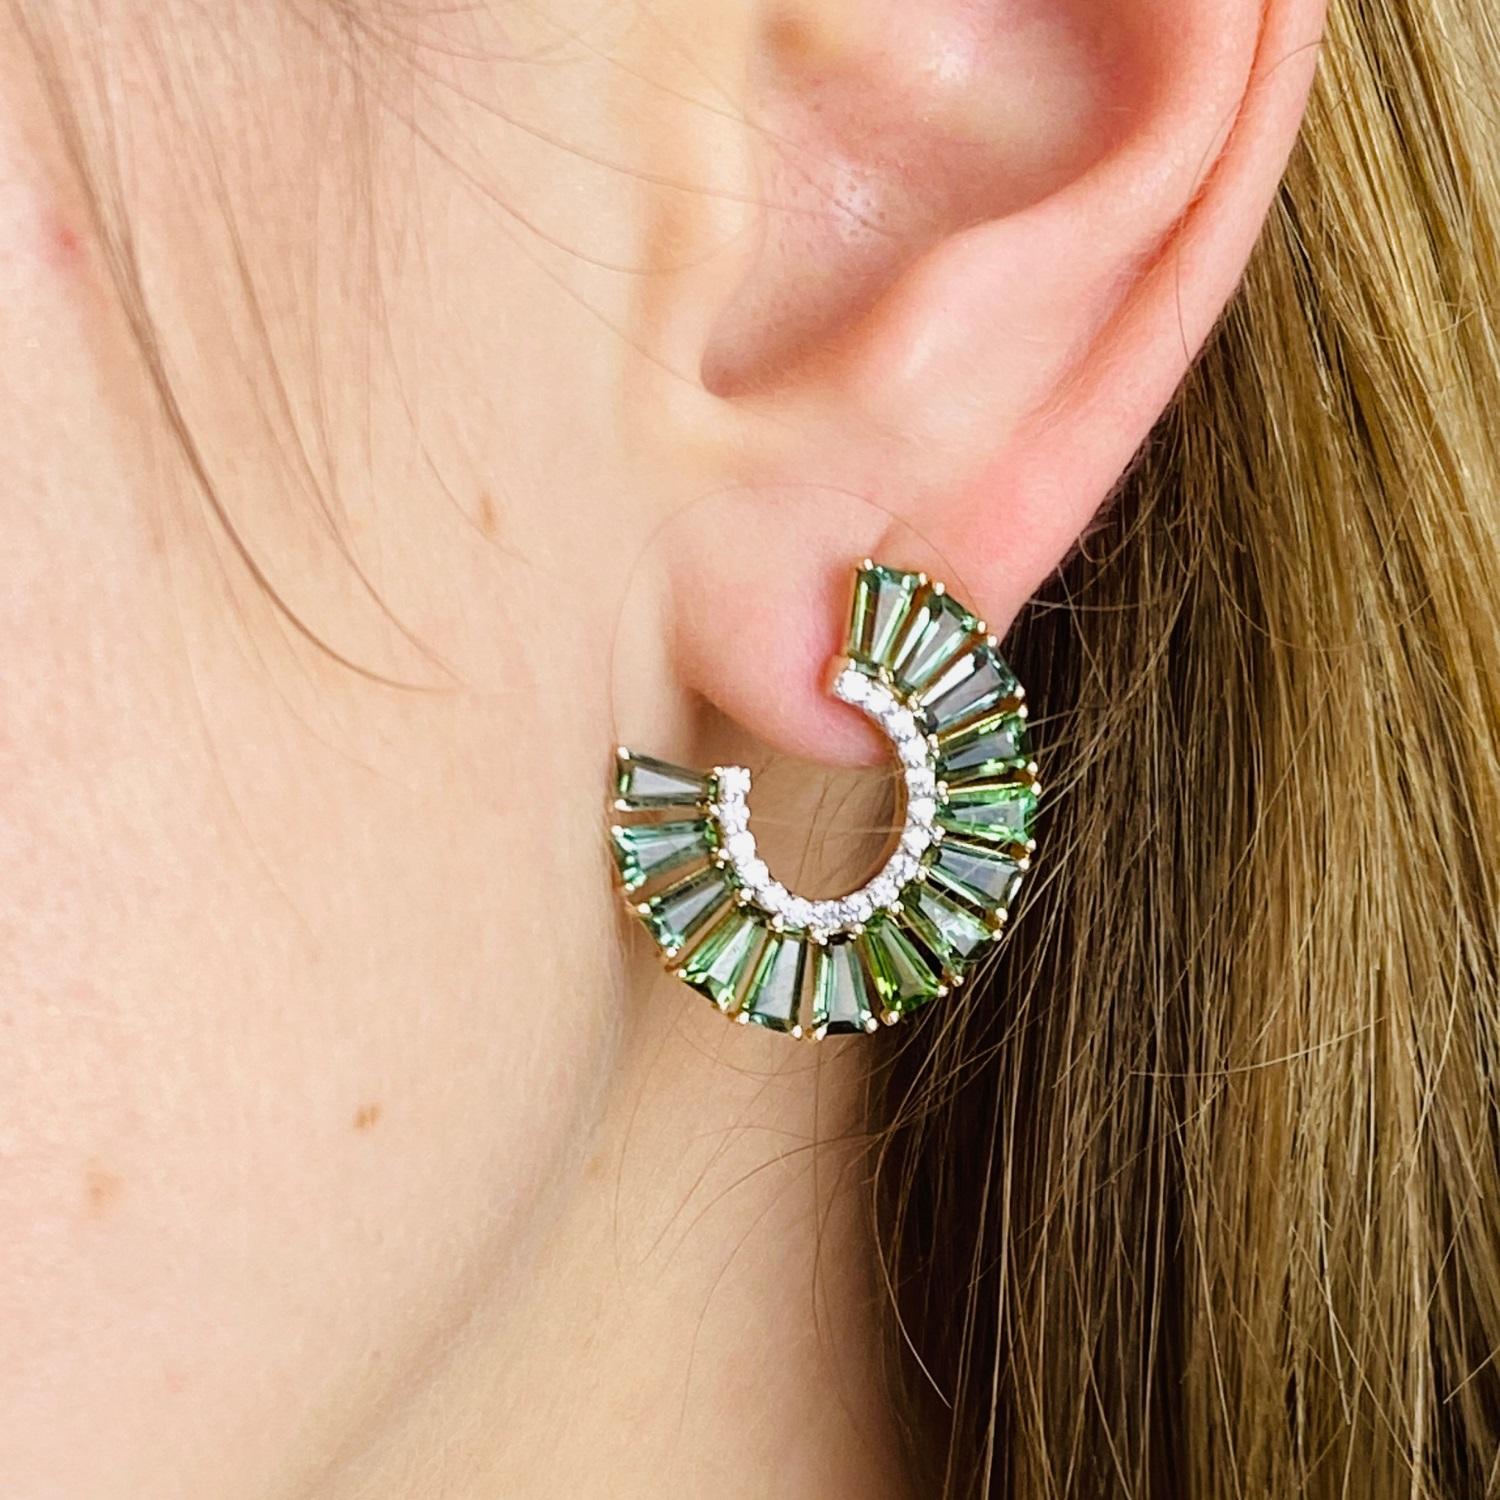 Tresor Beautiful Earring feature 5.70 total carats of Green Tourmaline & 0.35 carats of Diamond. The Earring is an ode to the luxurious yet classic beauty with sparkly gemstones and feminine hues. Their contemporary and modern design make them